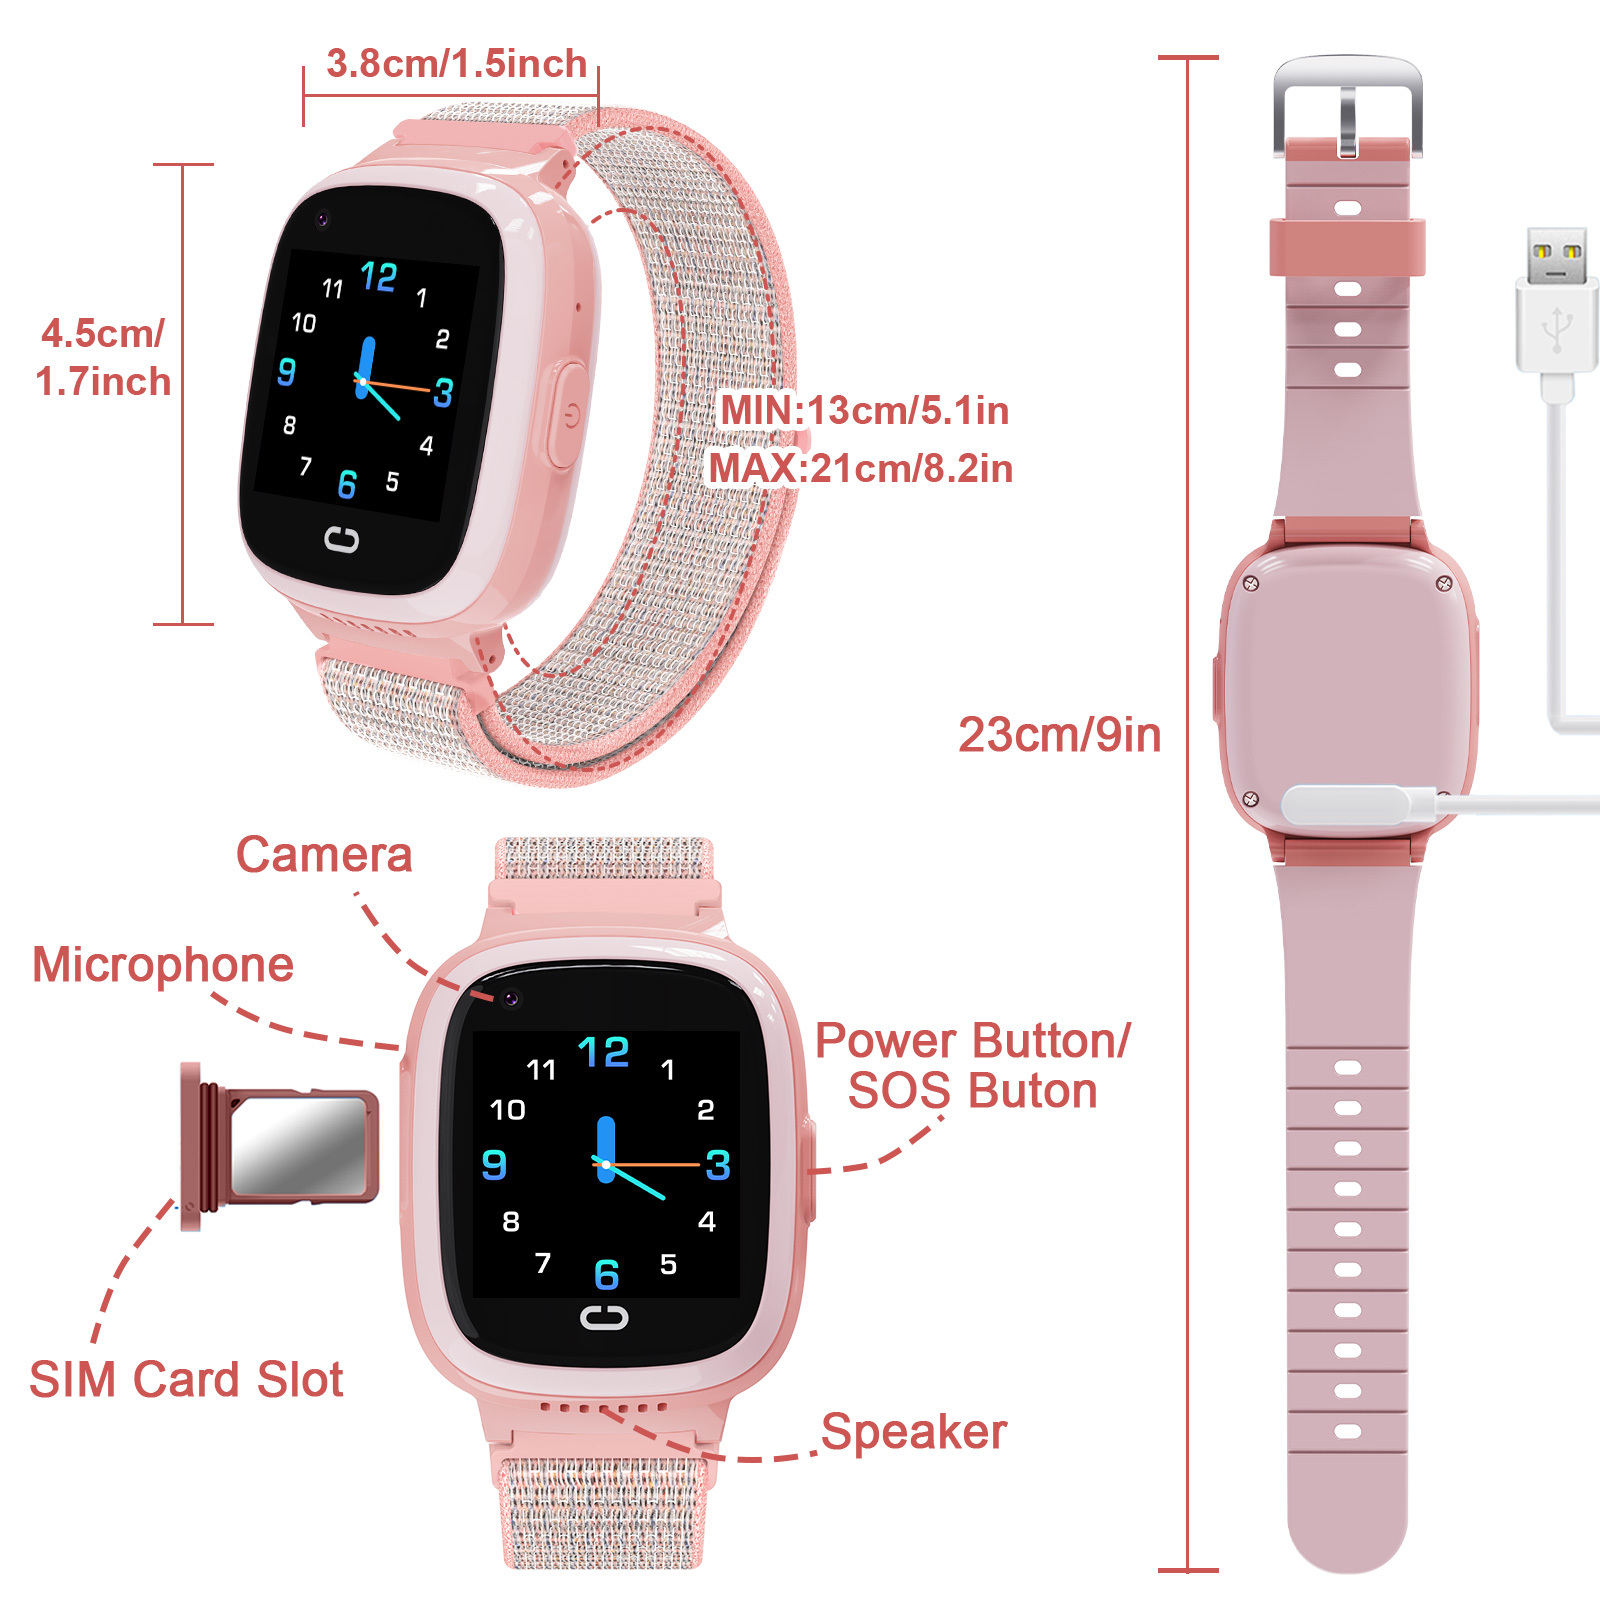 PTHTECHUS Smartwatch for Kids with GPS 4G HD Touchscreen Watch with Phone GPS Tracker Real-Time Location SOS Video Call Voice Chat Camera for Boys Girls Gift Pink - image 5 of 10